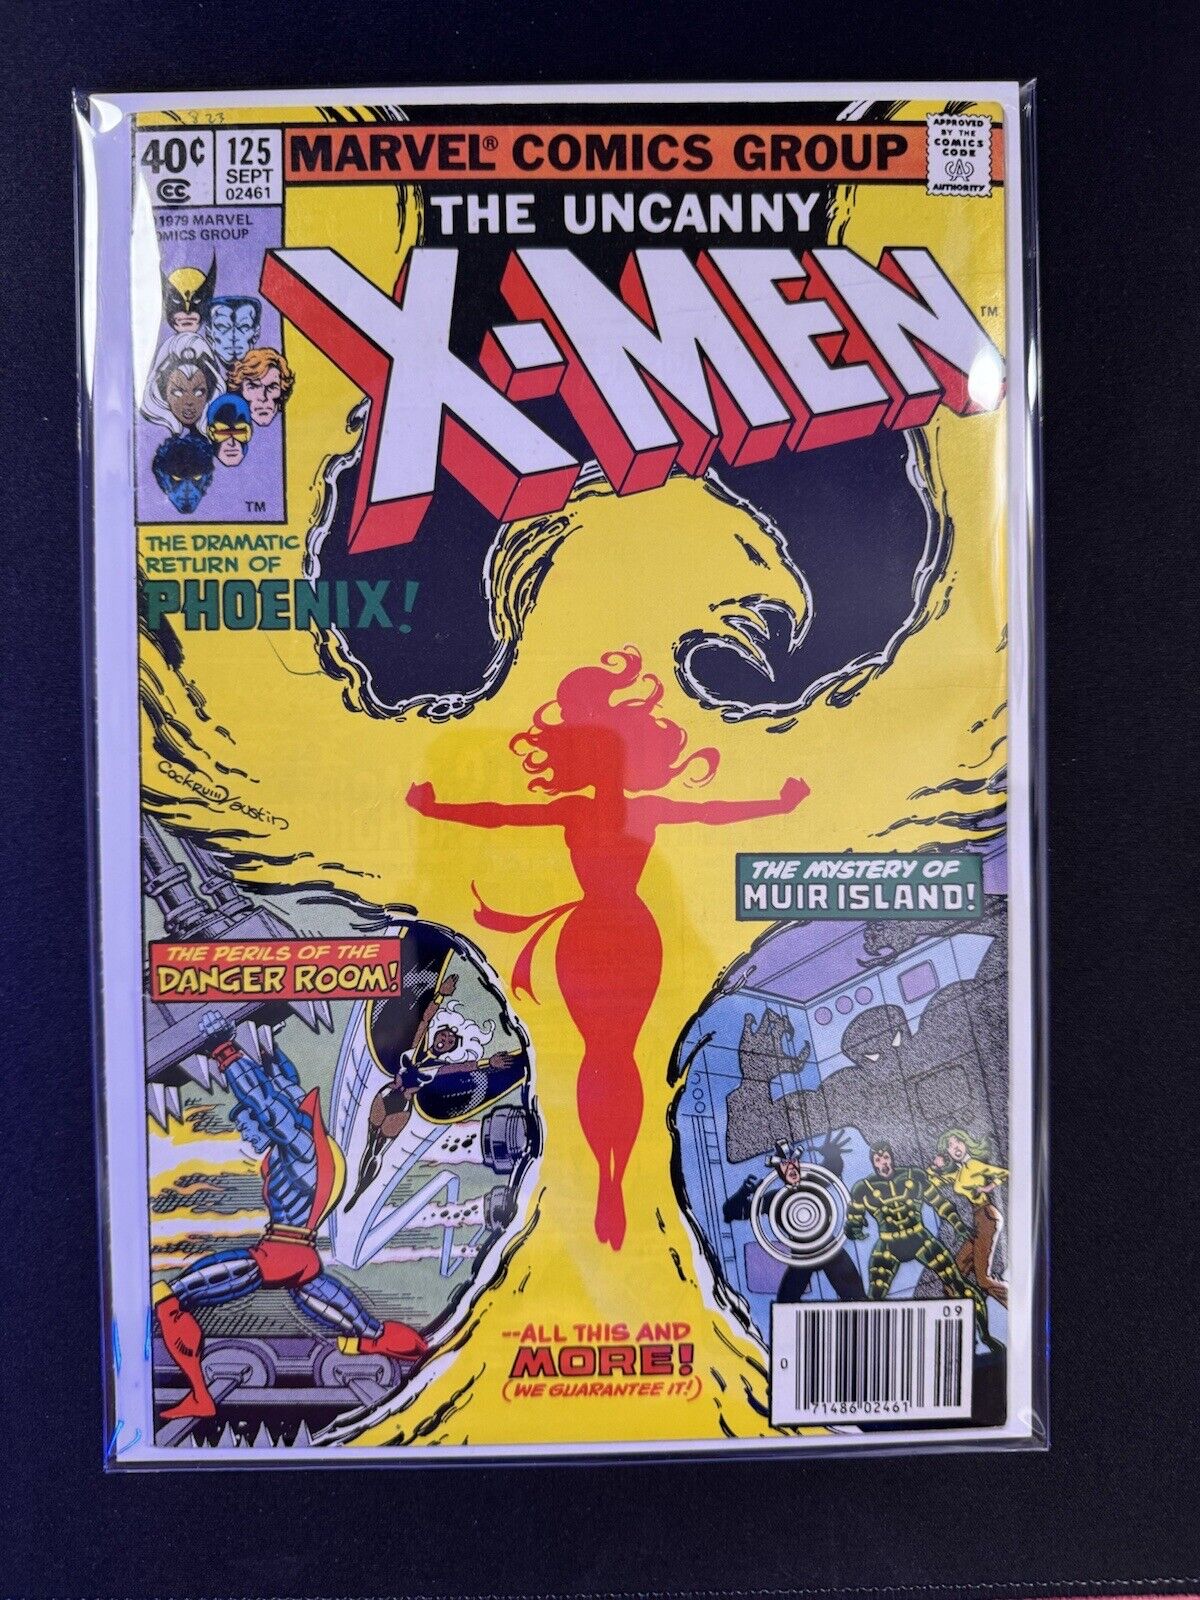 🔥 THE UNCANNY X-MEN #125 (1979) / FIRST APPEARANCE OF PROTEUS